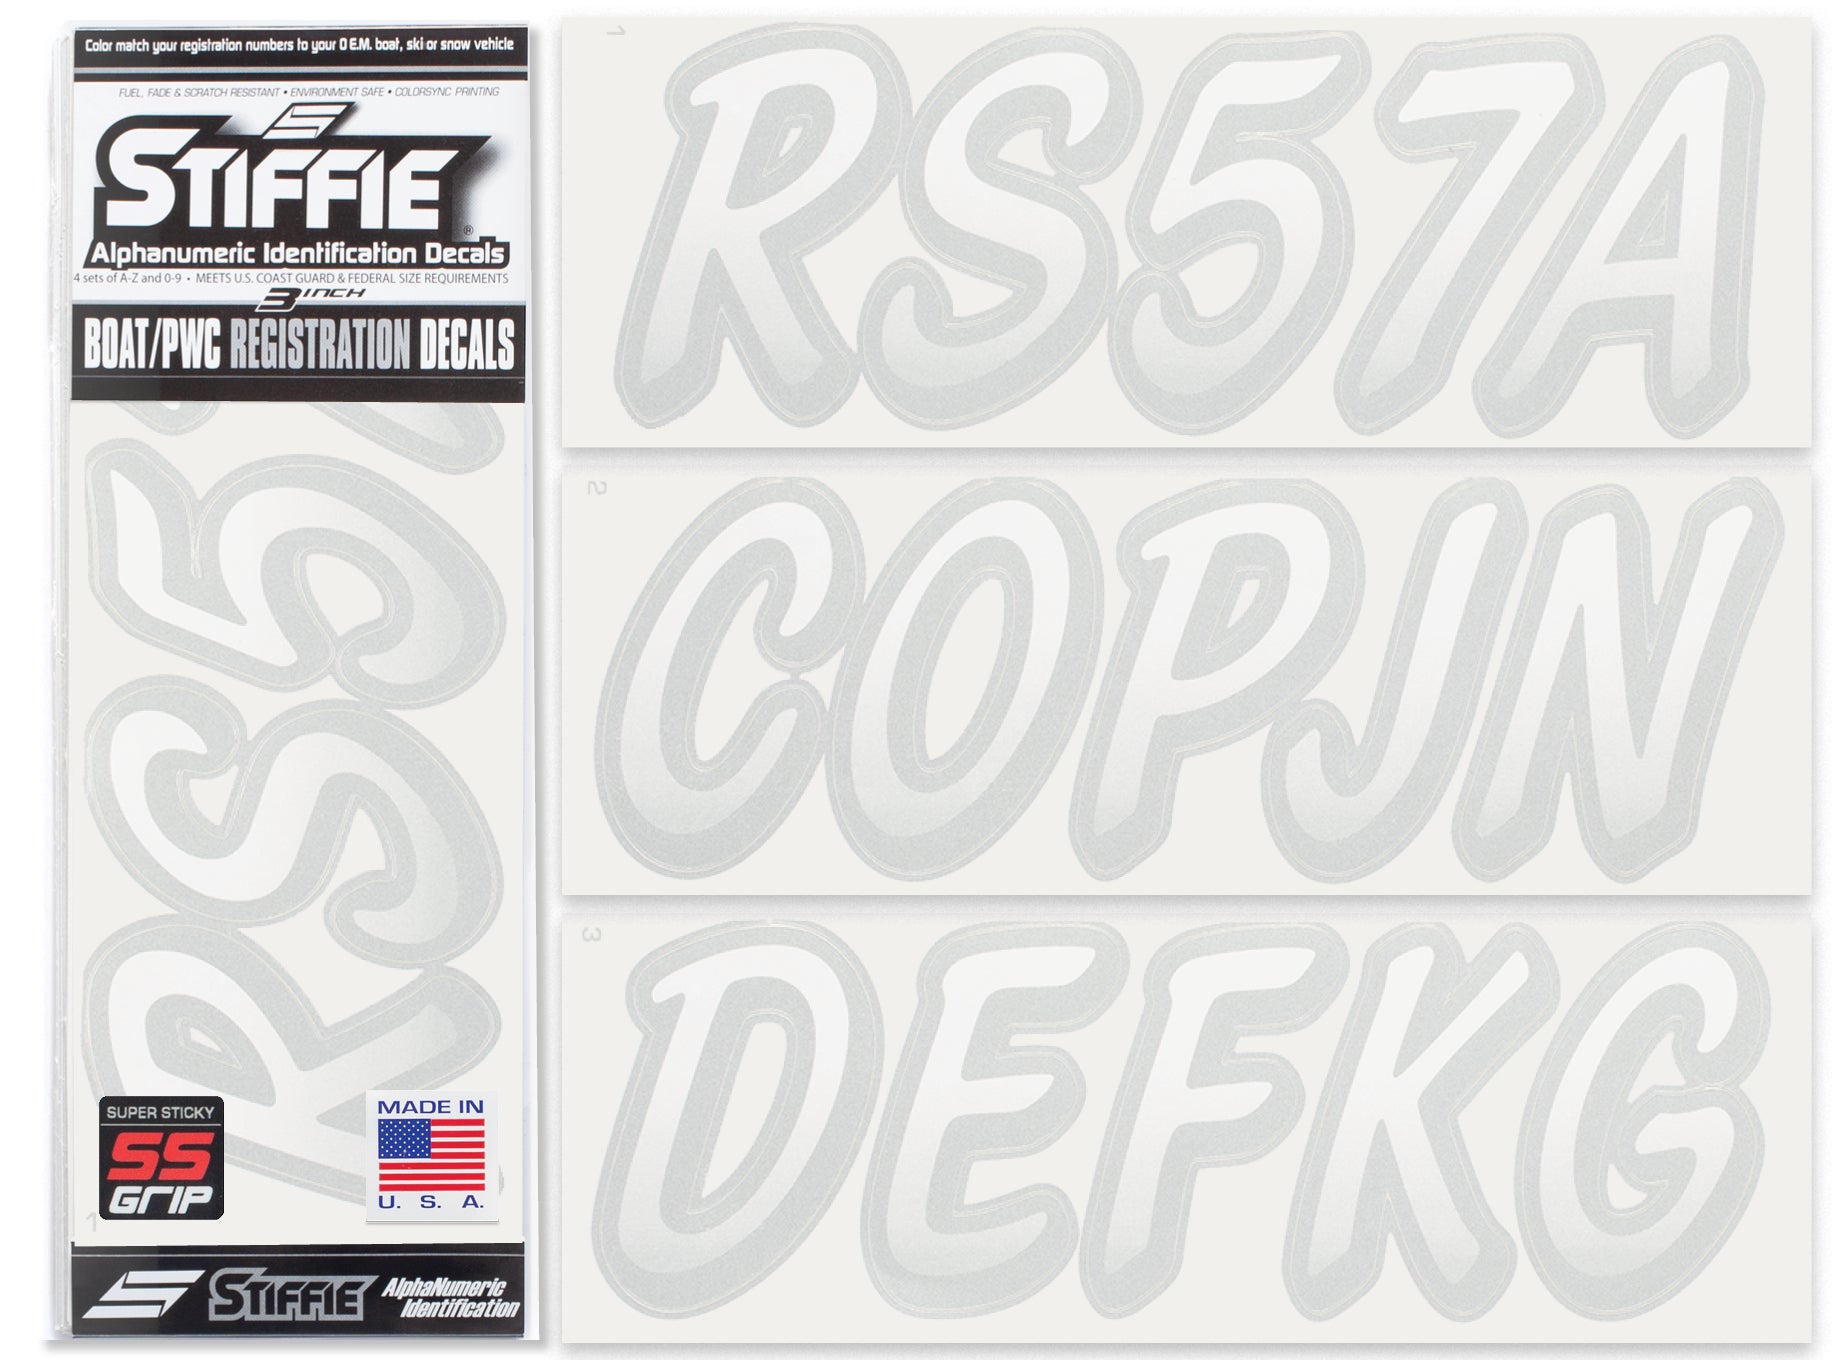 Stiffie Whipline White/Silver Super Sticky 3" Alpha Numeric Registration Identification Numbers Stickers Decals for Sea-Doo Spark, Inflatable Boats, Ribs, Hypalon/PVC, PWC and Boats.